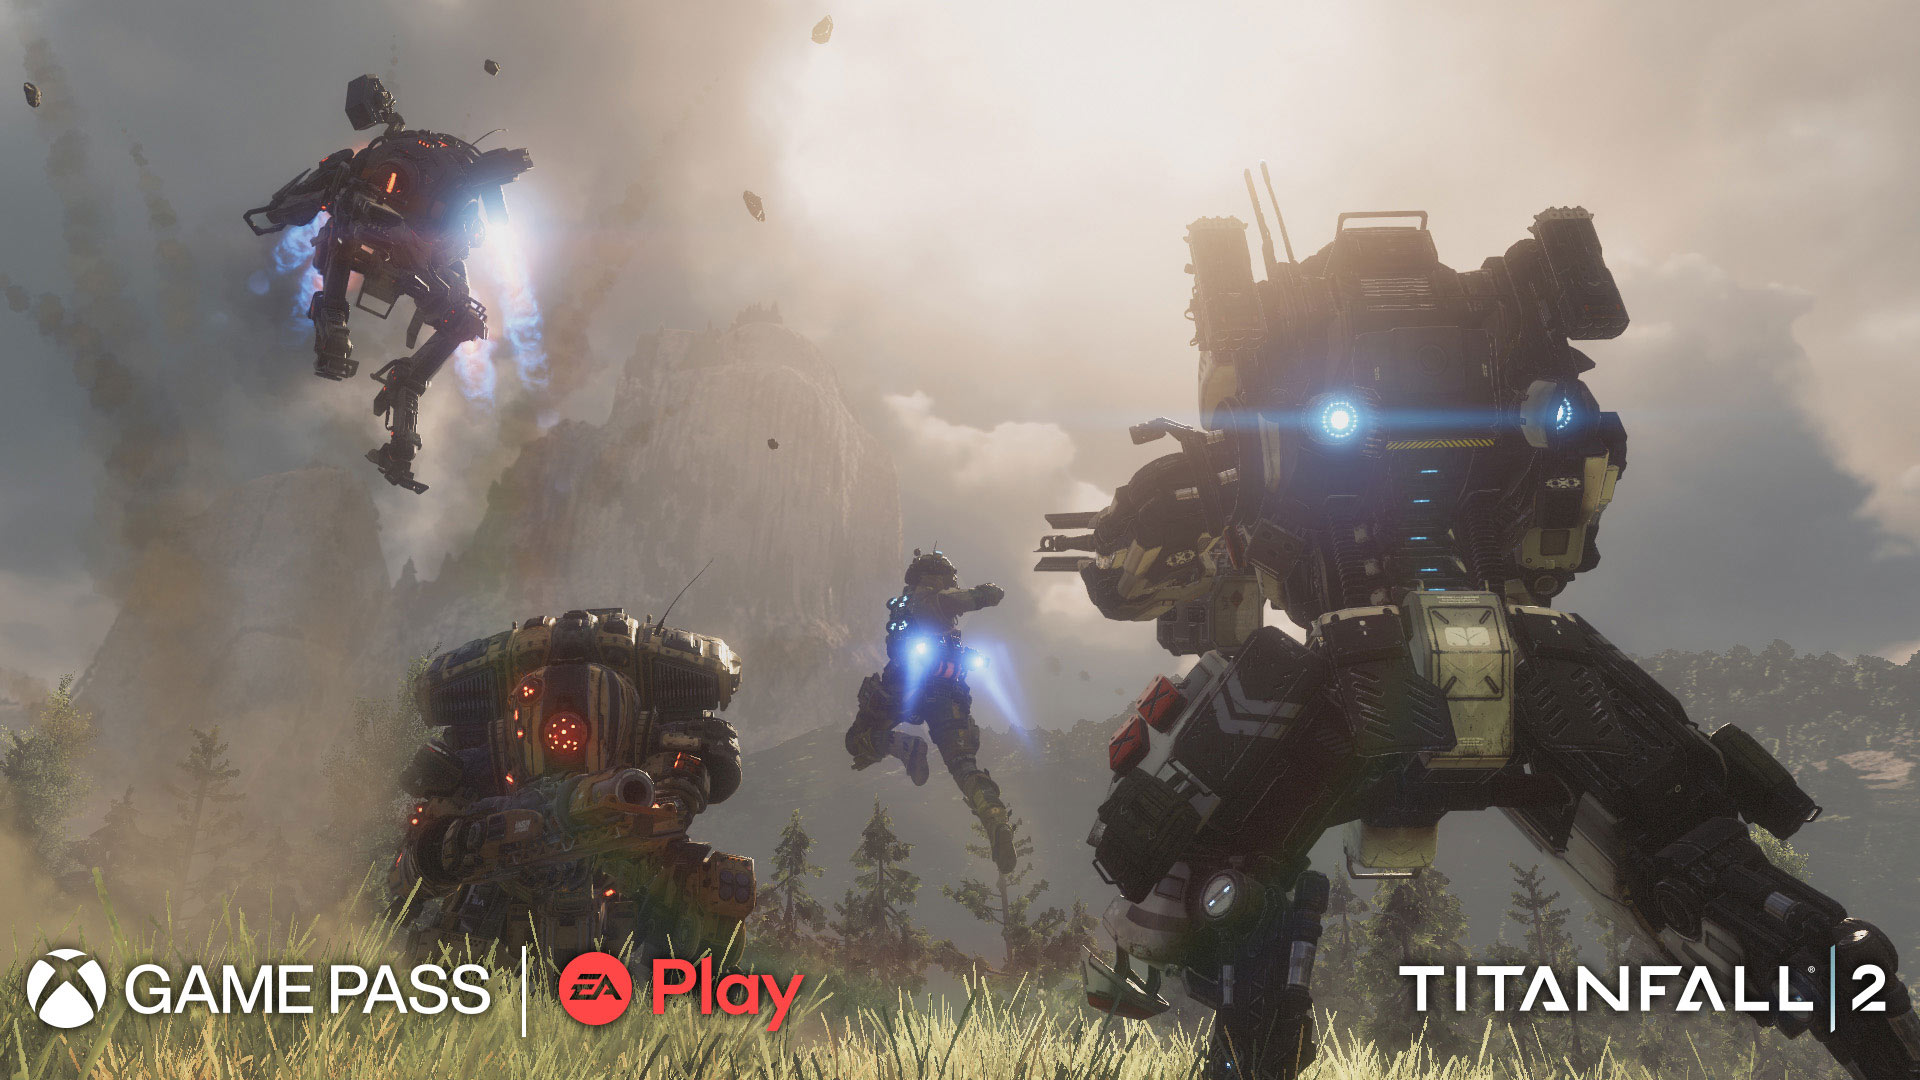 An image of three large mechs and a soldier with a jetpack flying into battle.